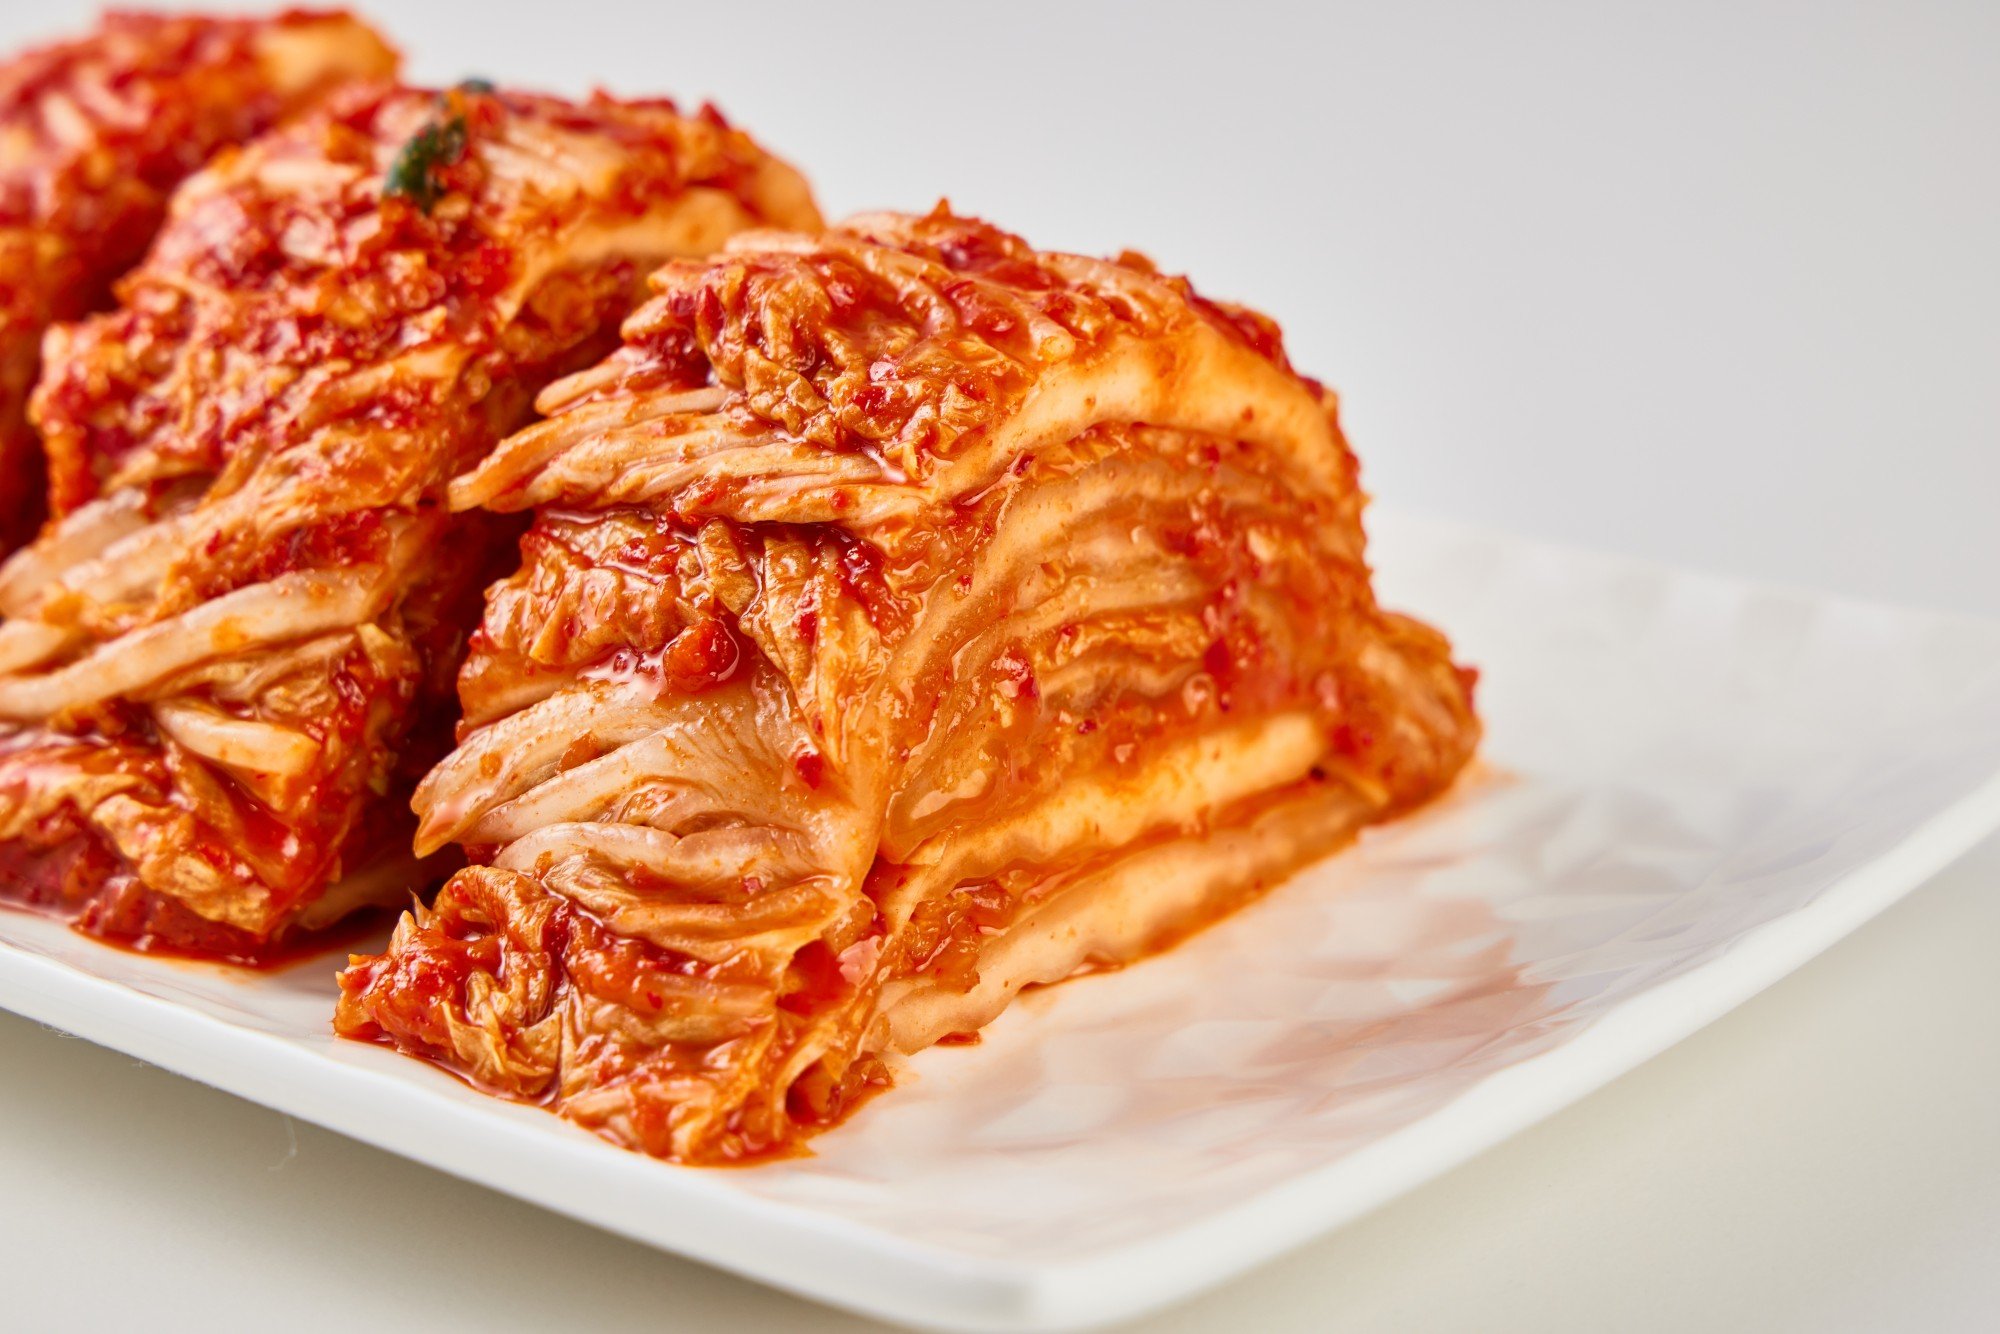 Kimchi controversy: some people in China have called for cabbage sanctions on Korea. Photo: Shutterstock